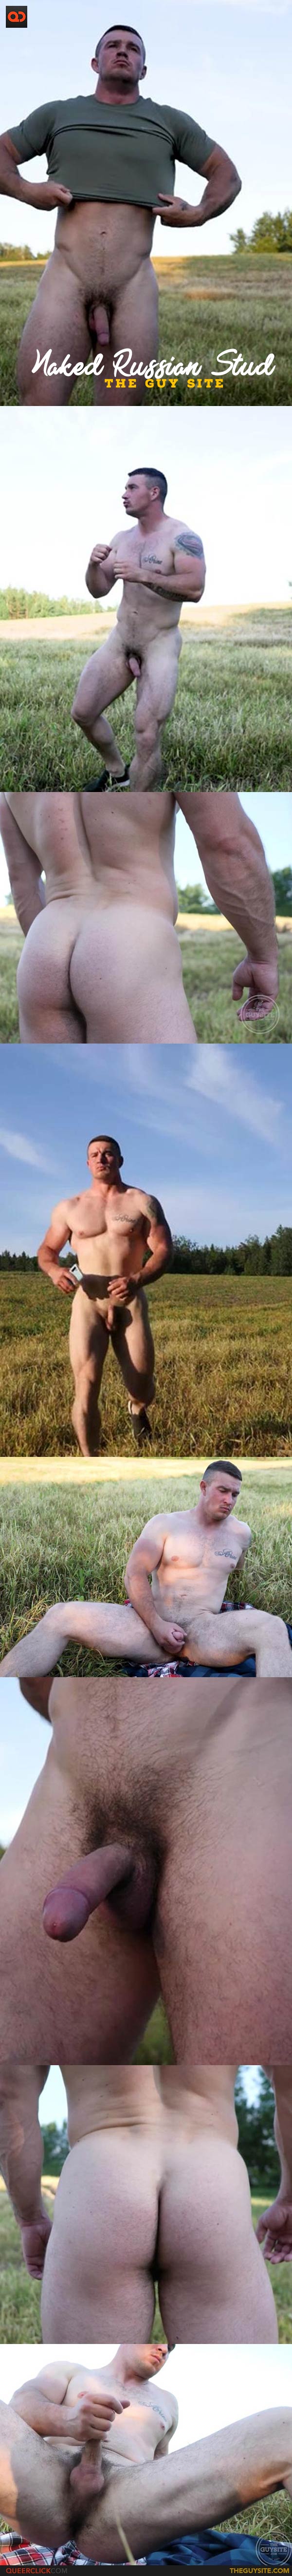 The Guy Site: Naked Russian Stud